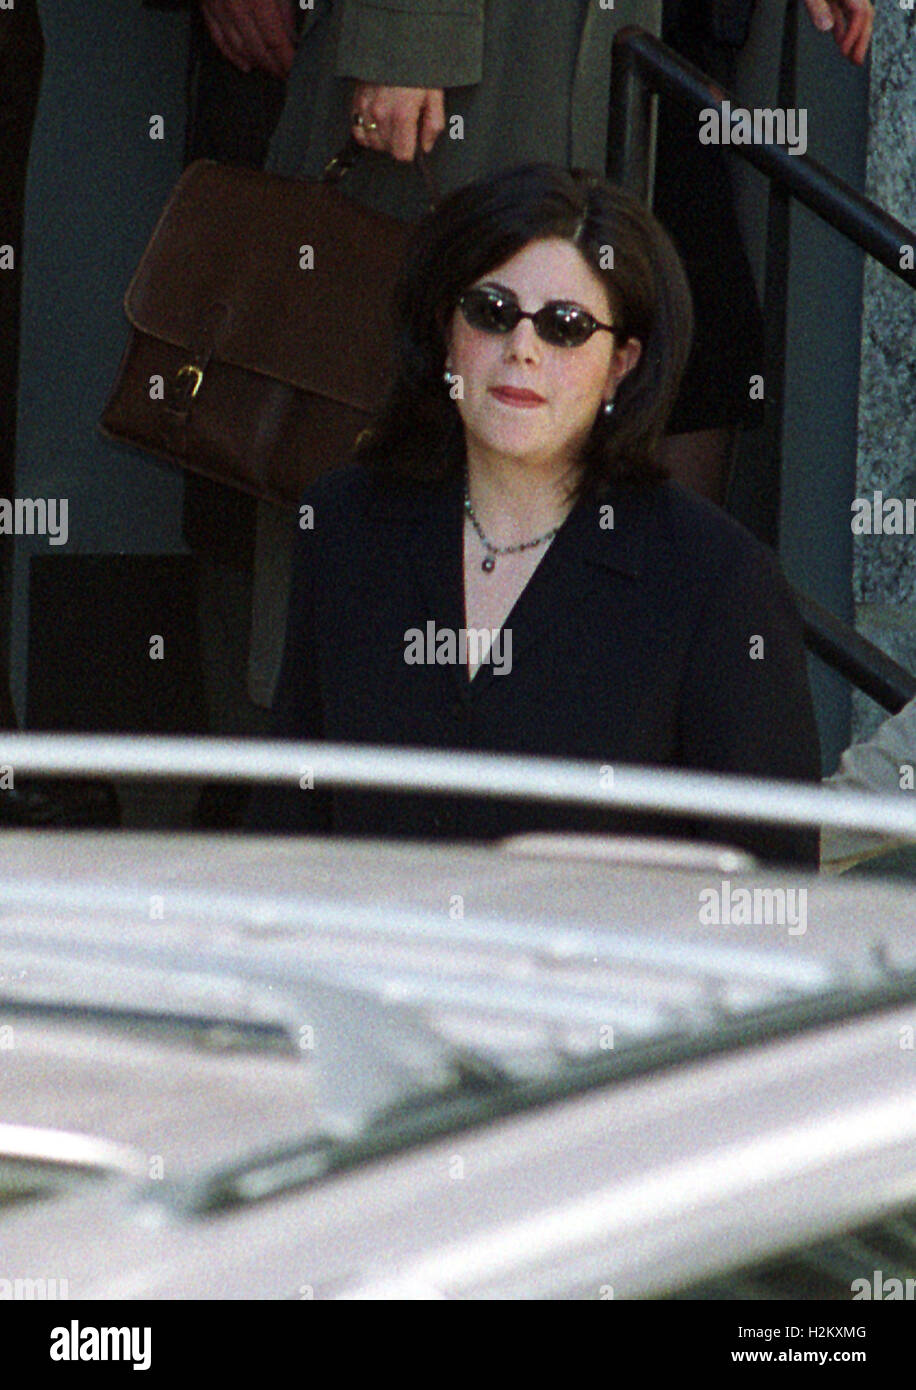 Ellicott City, MD - December 16, 1999 -- Monica Lewinsky departs Howard County (Maryland) Court after testifying in the Linda Tripp wiretap case on 16 December, 1999.Credit: Ron Sachs/CNP - NO WIRE SERVICE - Stock Photo